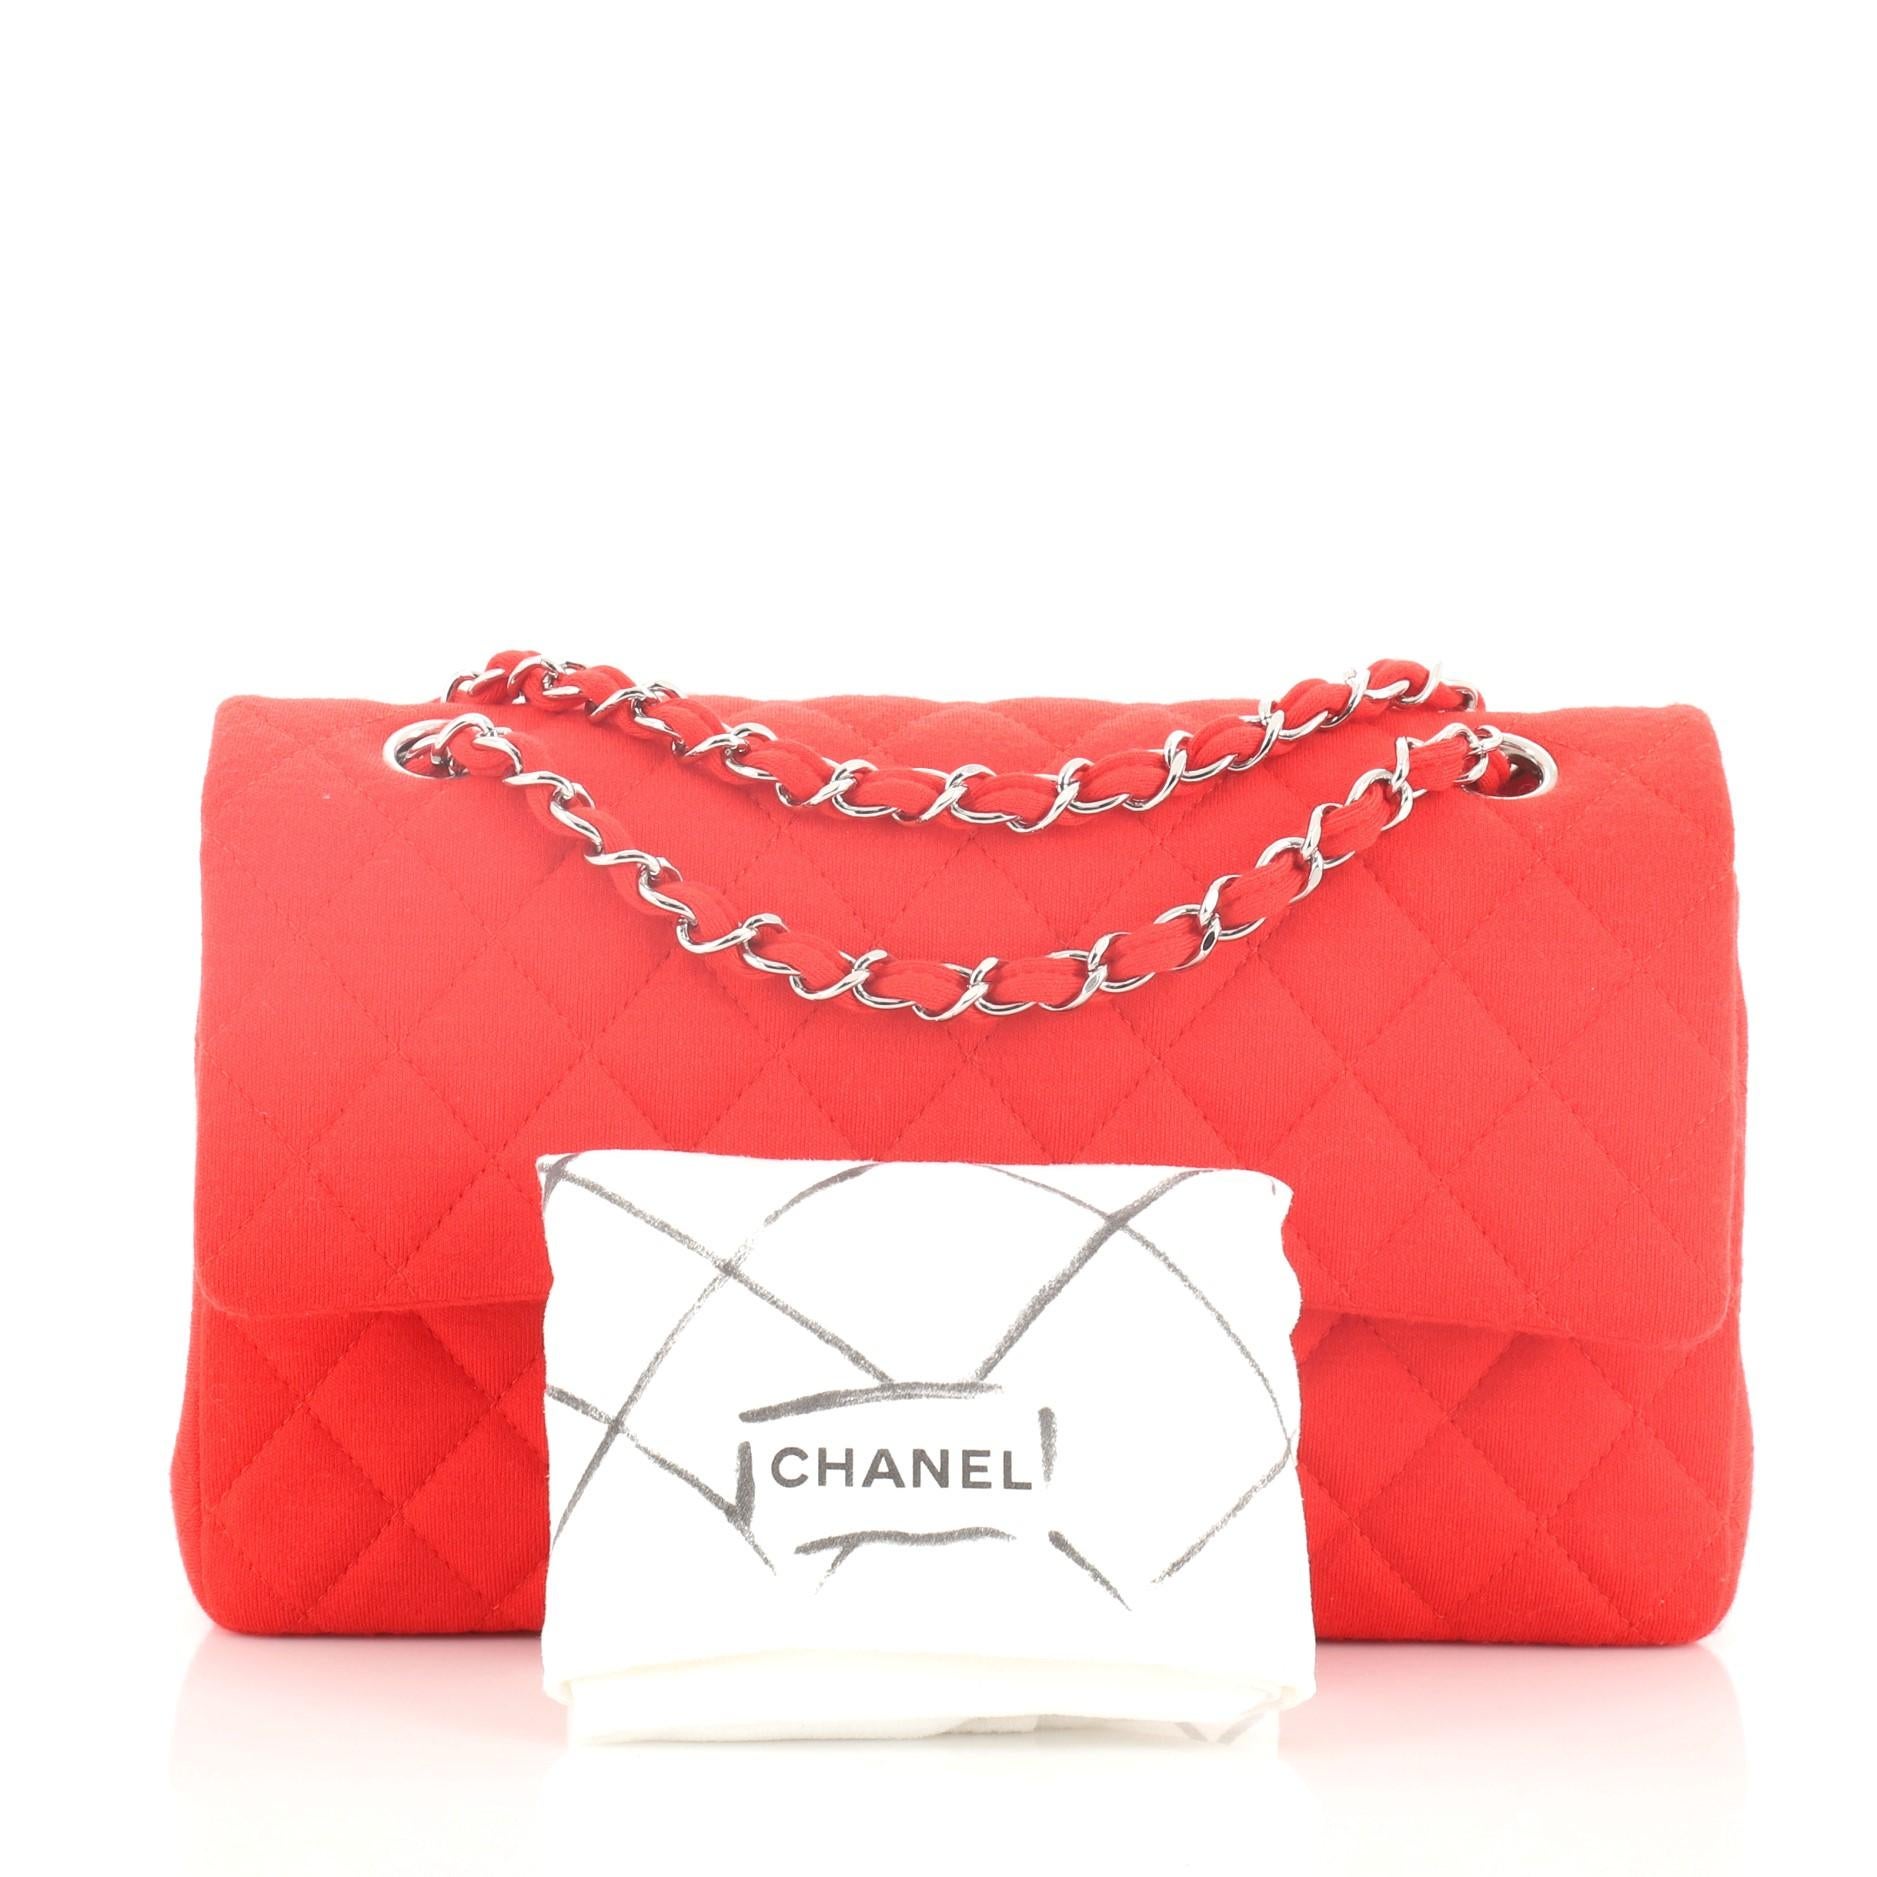 This Chanel Classic Double Flap Bag Quilted Jersey Medium, crafted from red quilted jersey, features woven-in jersey chain strap, exterior back pocket and silver-tone hardware. Its double flap and frontal CC turn-lock closure opens to a red leather